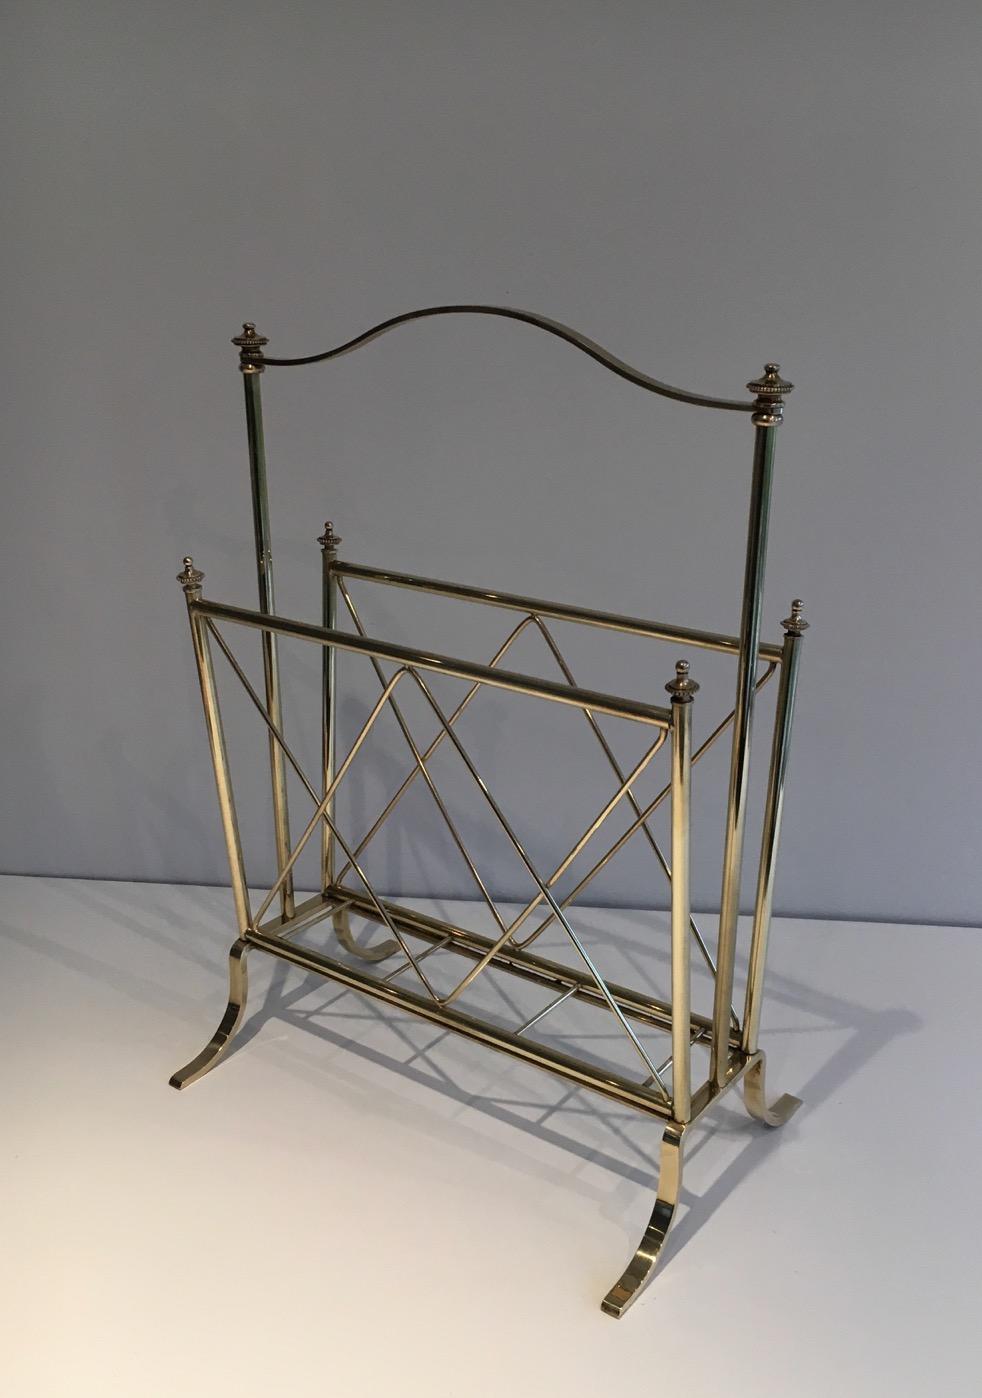 This very nice and elegant neoclassical stye magazine rack is all made of brass. This is a French work attributed to famous French designer Maison Jansen. Circa 1940.